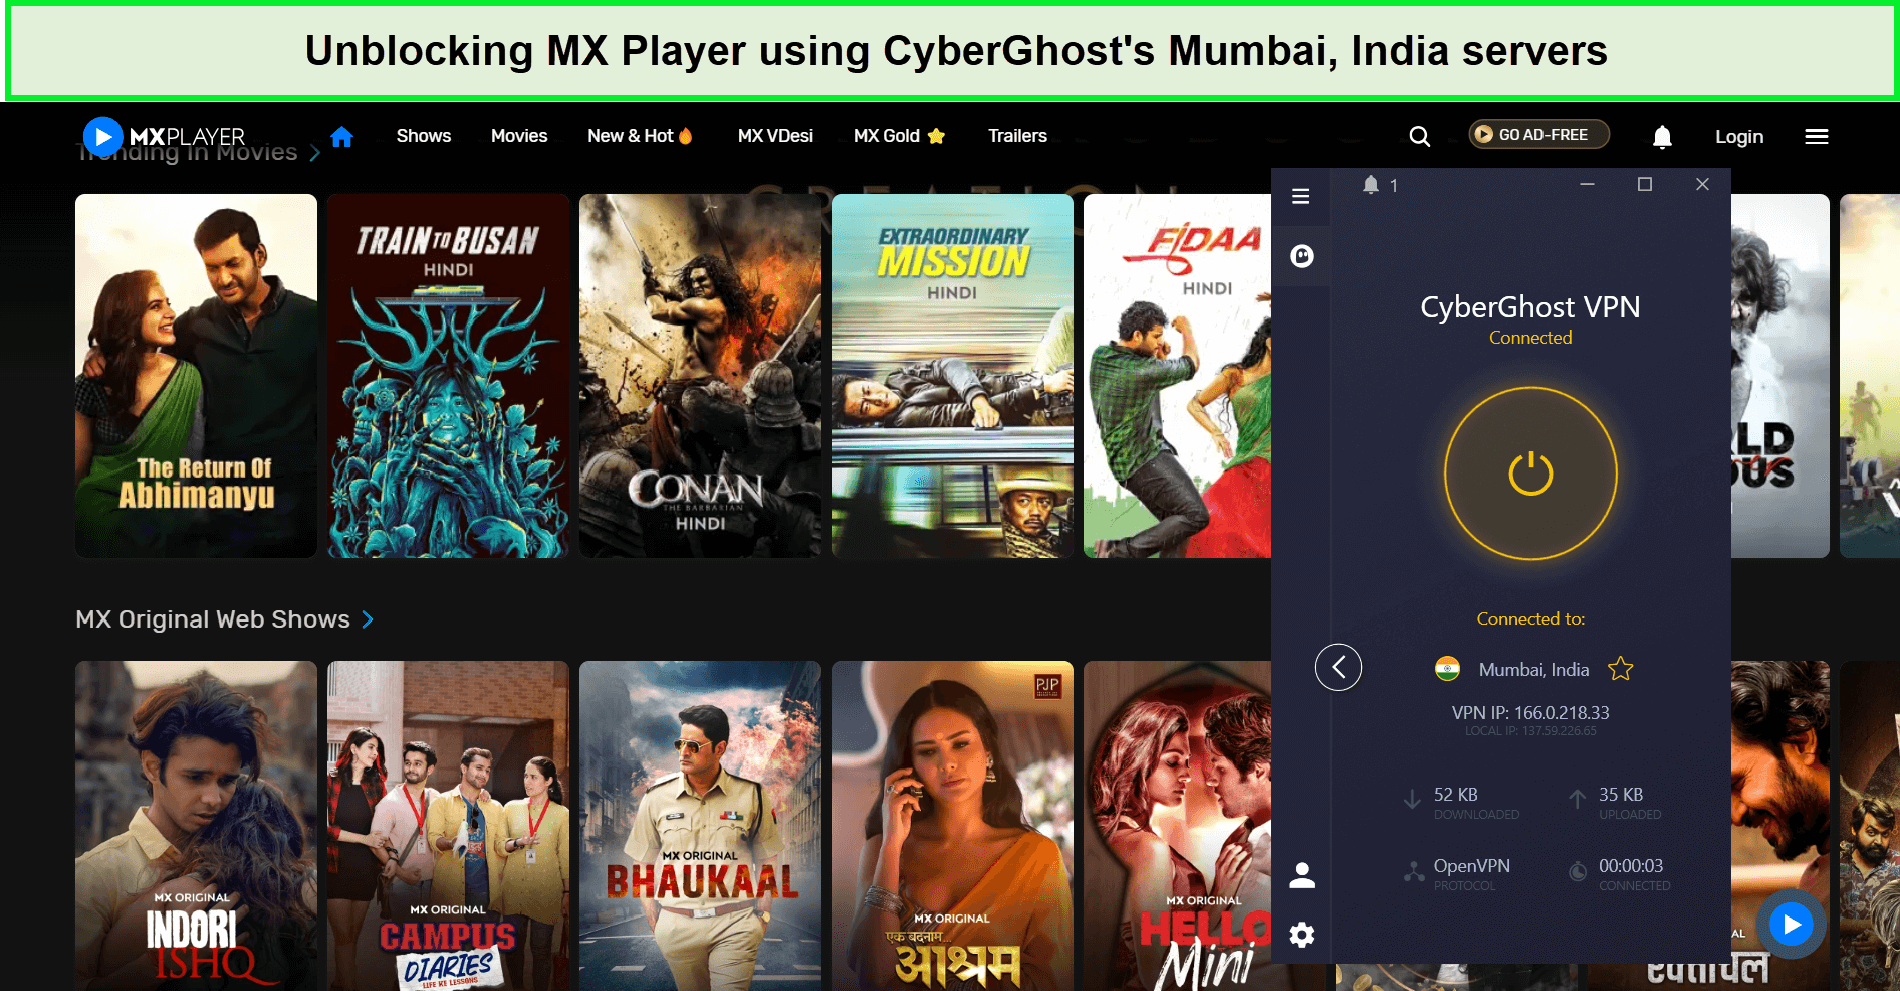 mx-player-in-Singapore-unblocked-cyberghost